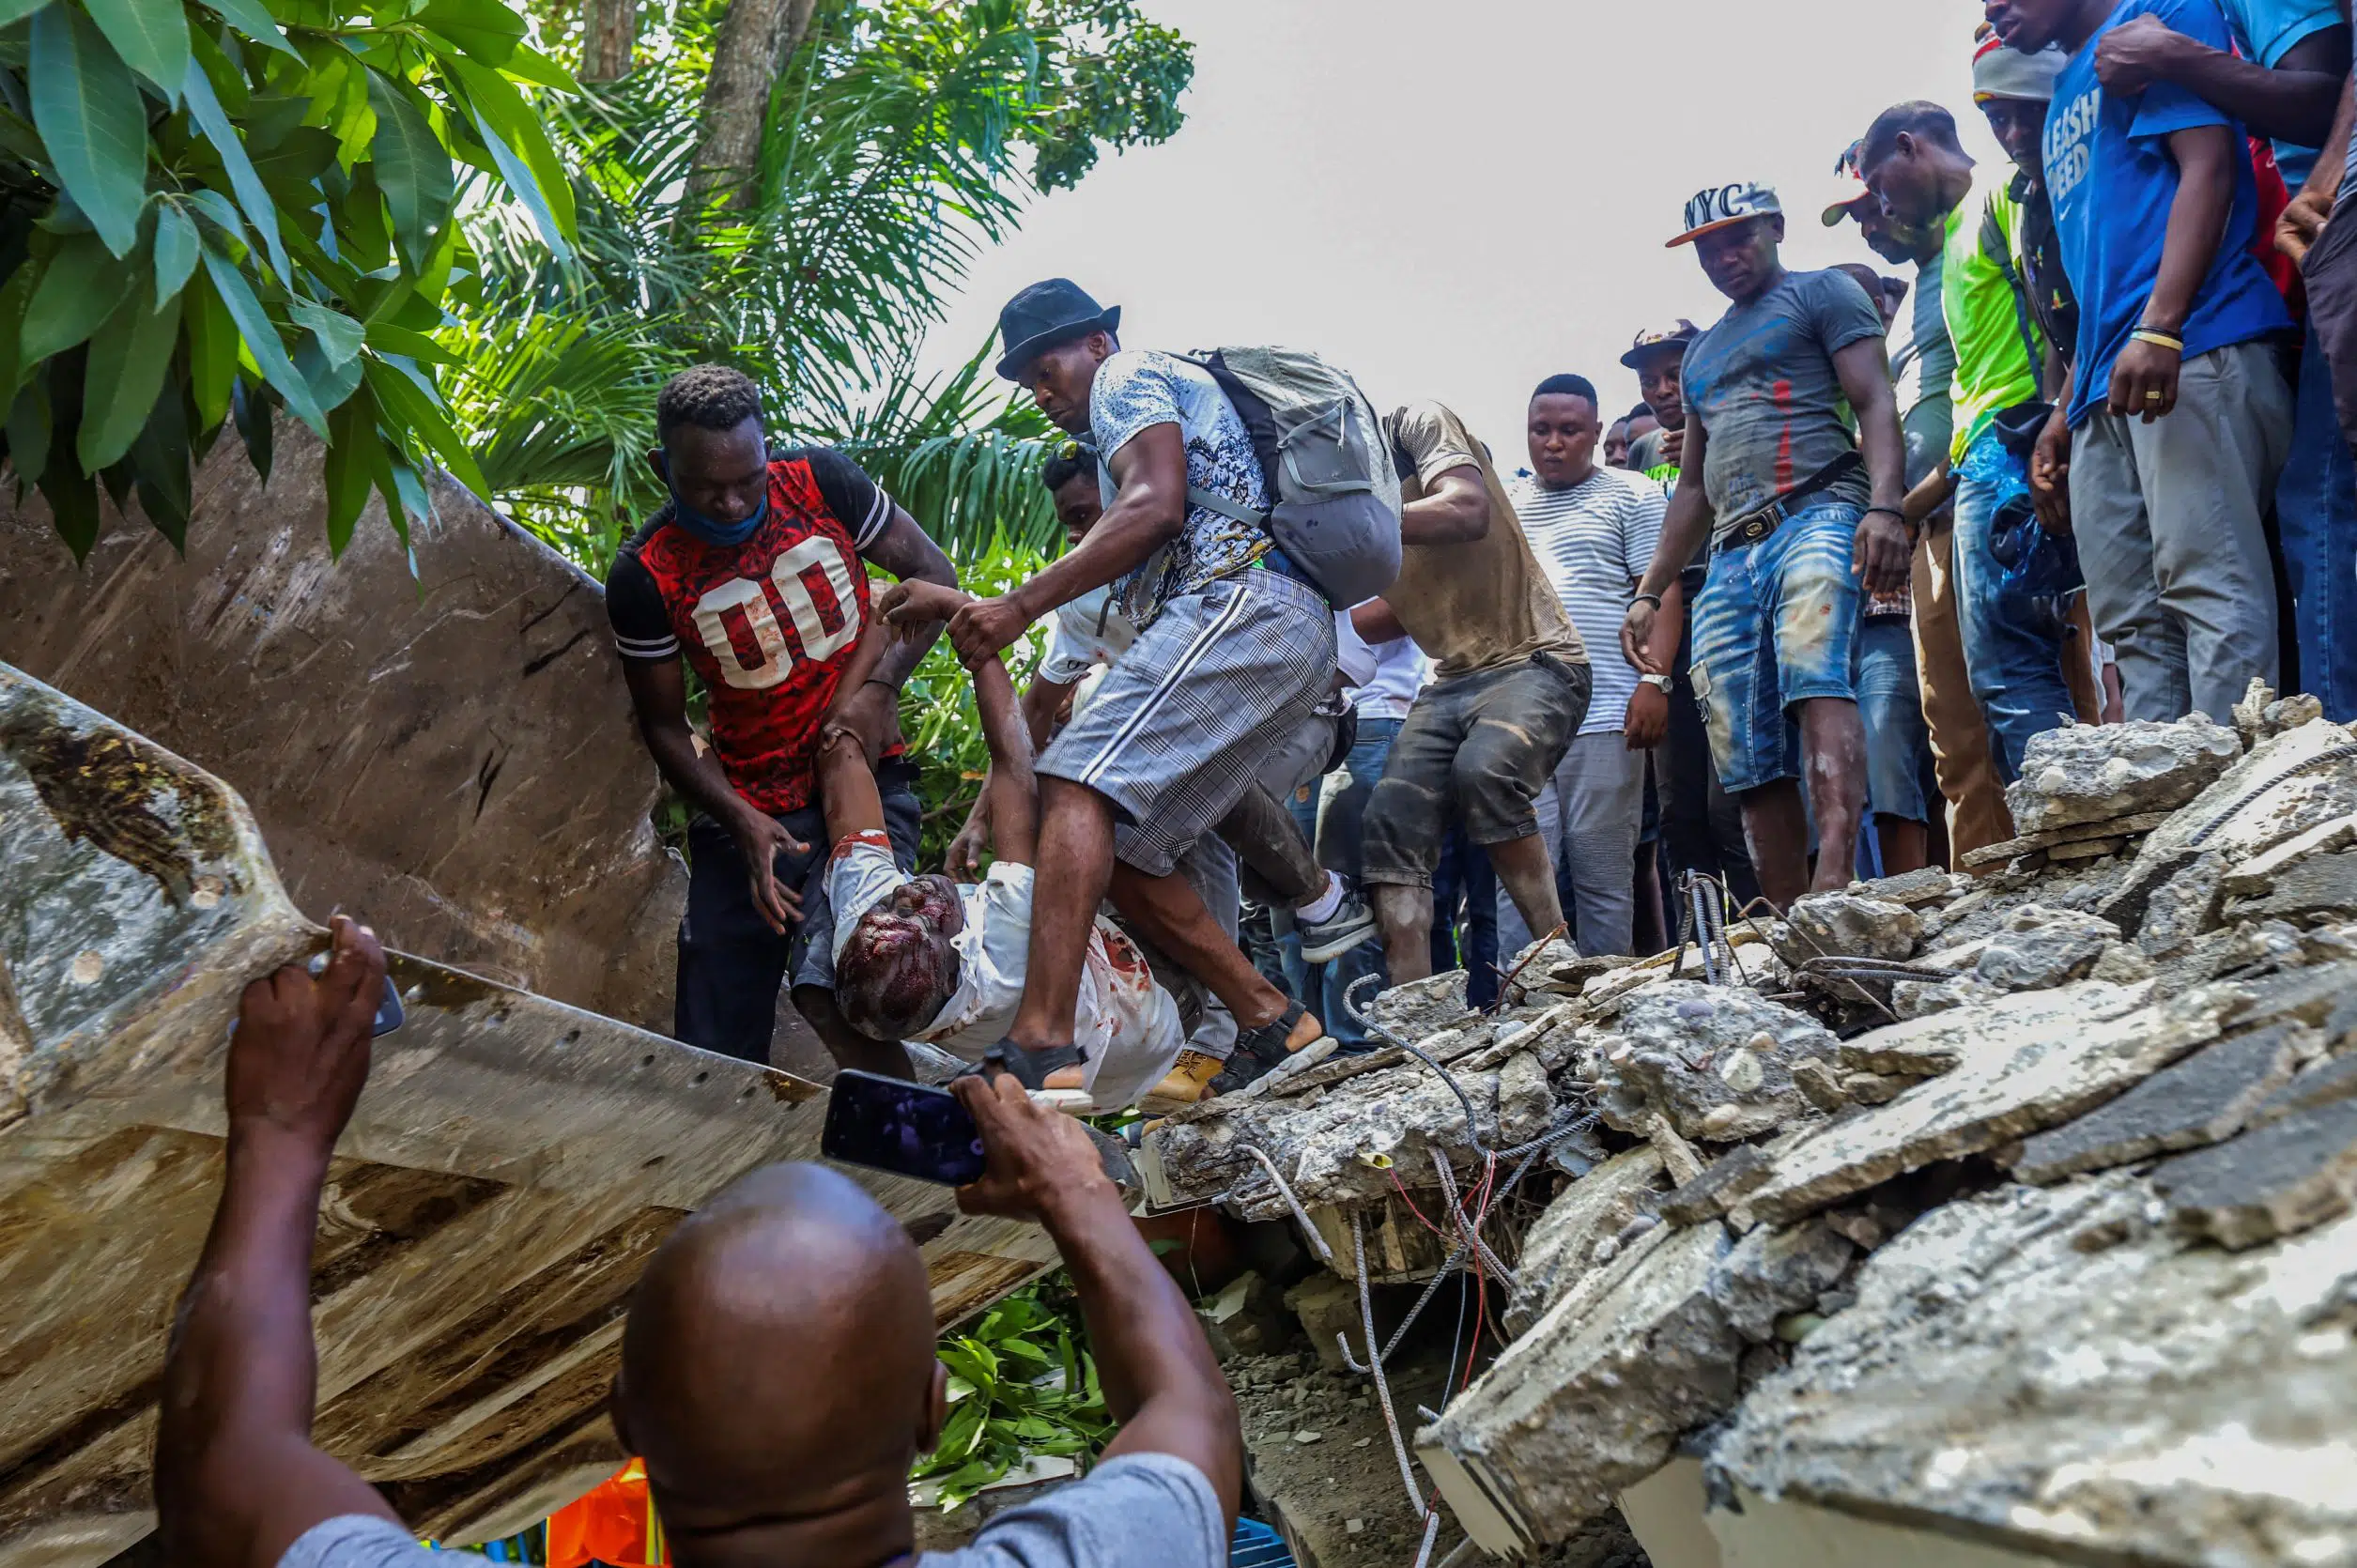 USAID Sends Search and Rescue Teams to Assist With Haitian Quake Response